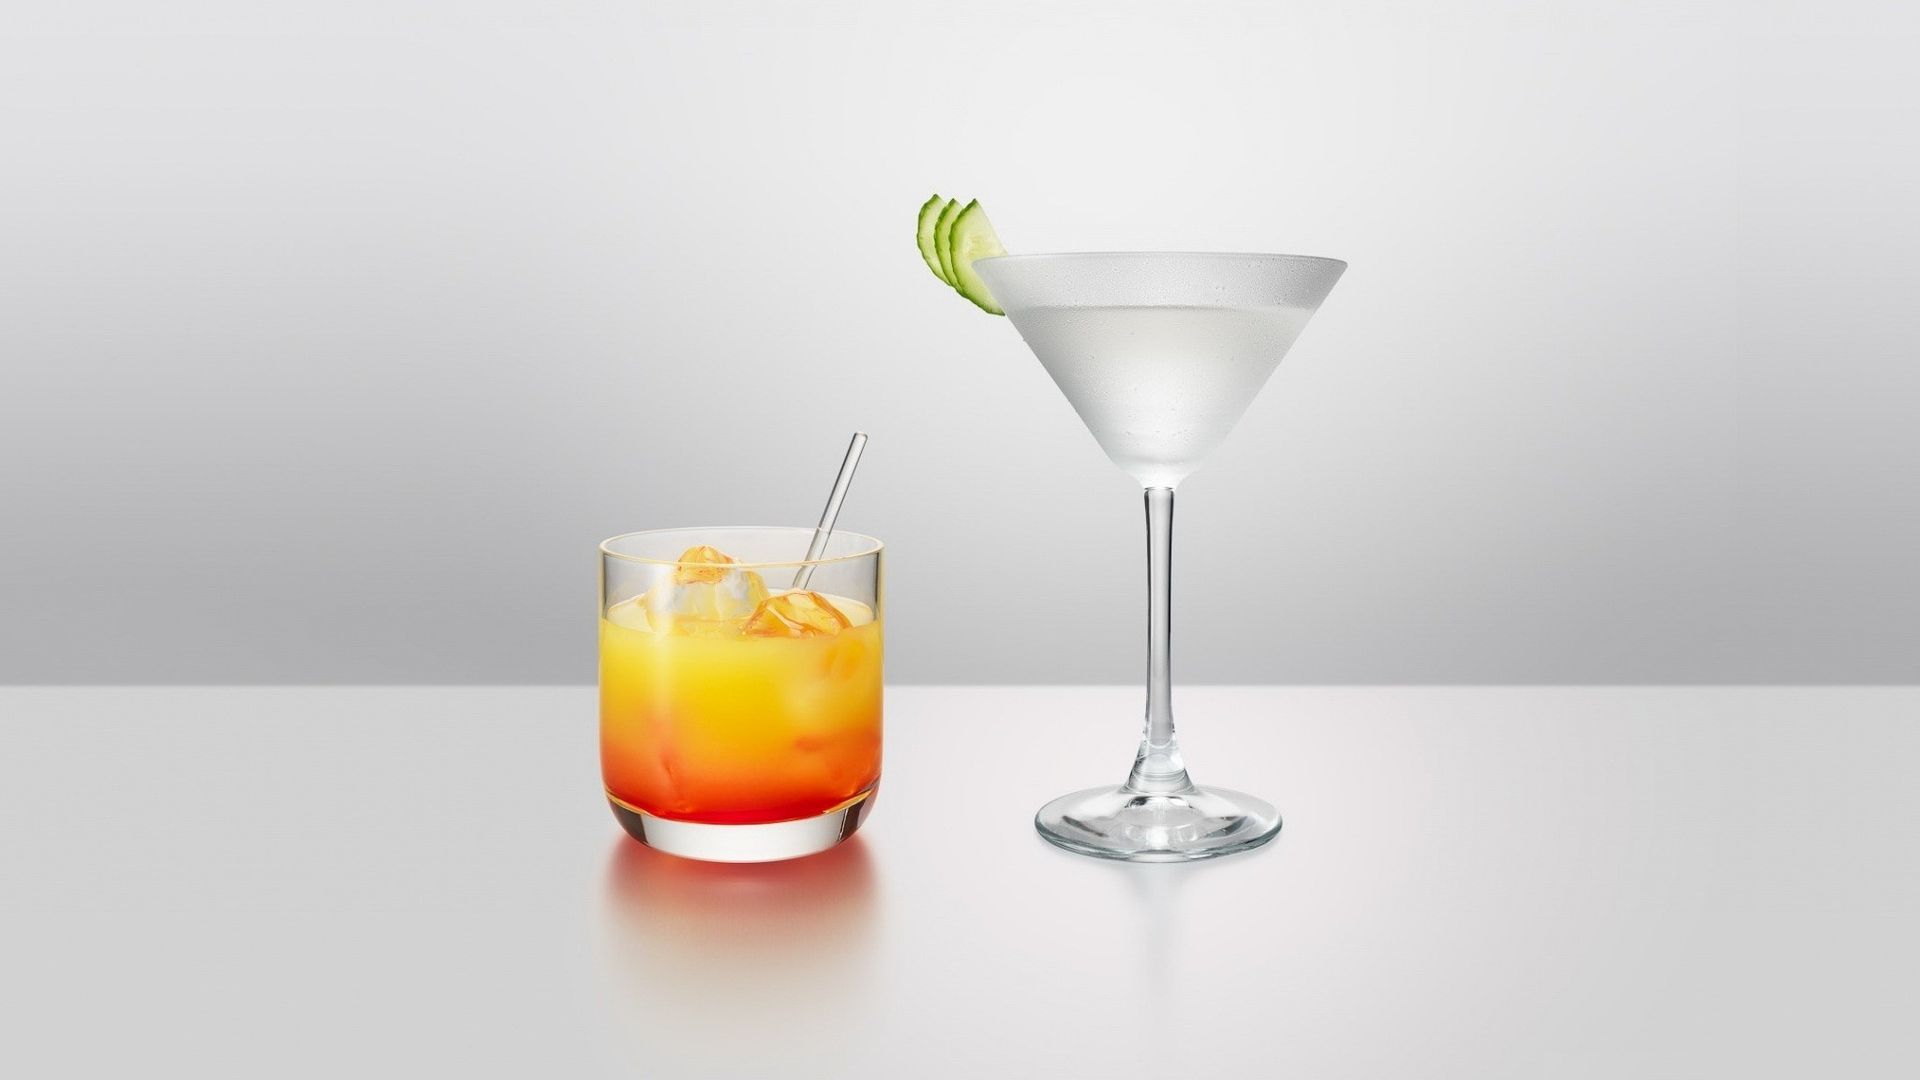 Cocktails Drinks With Plain Background - HD Wallpaper 